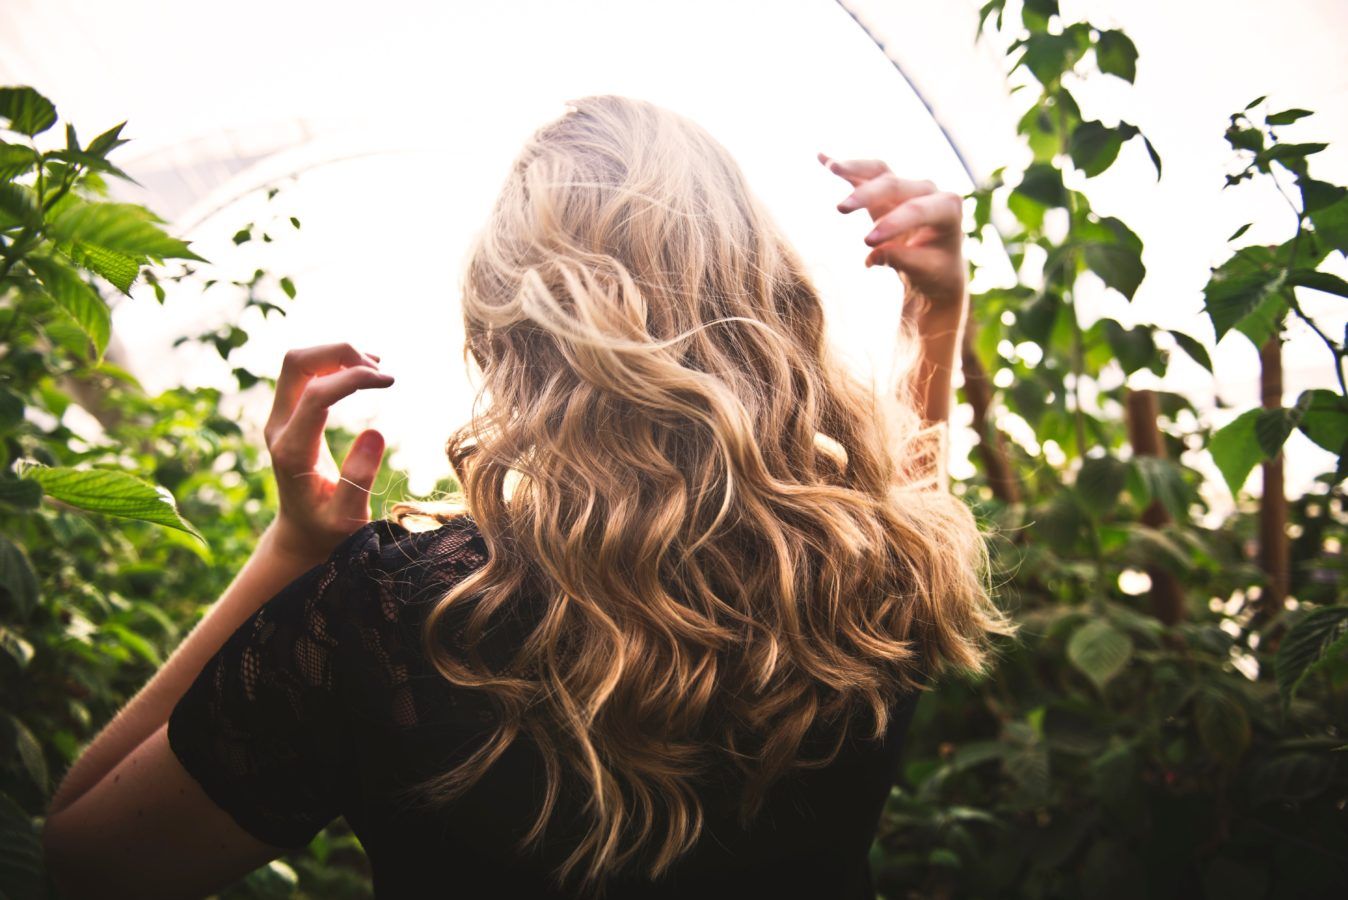 4 nifty hacks for the most stunning heatless curls overnight